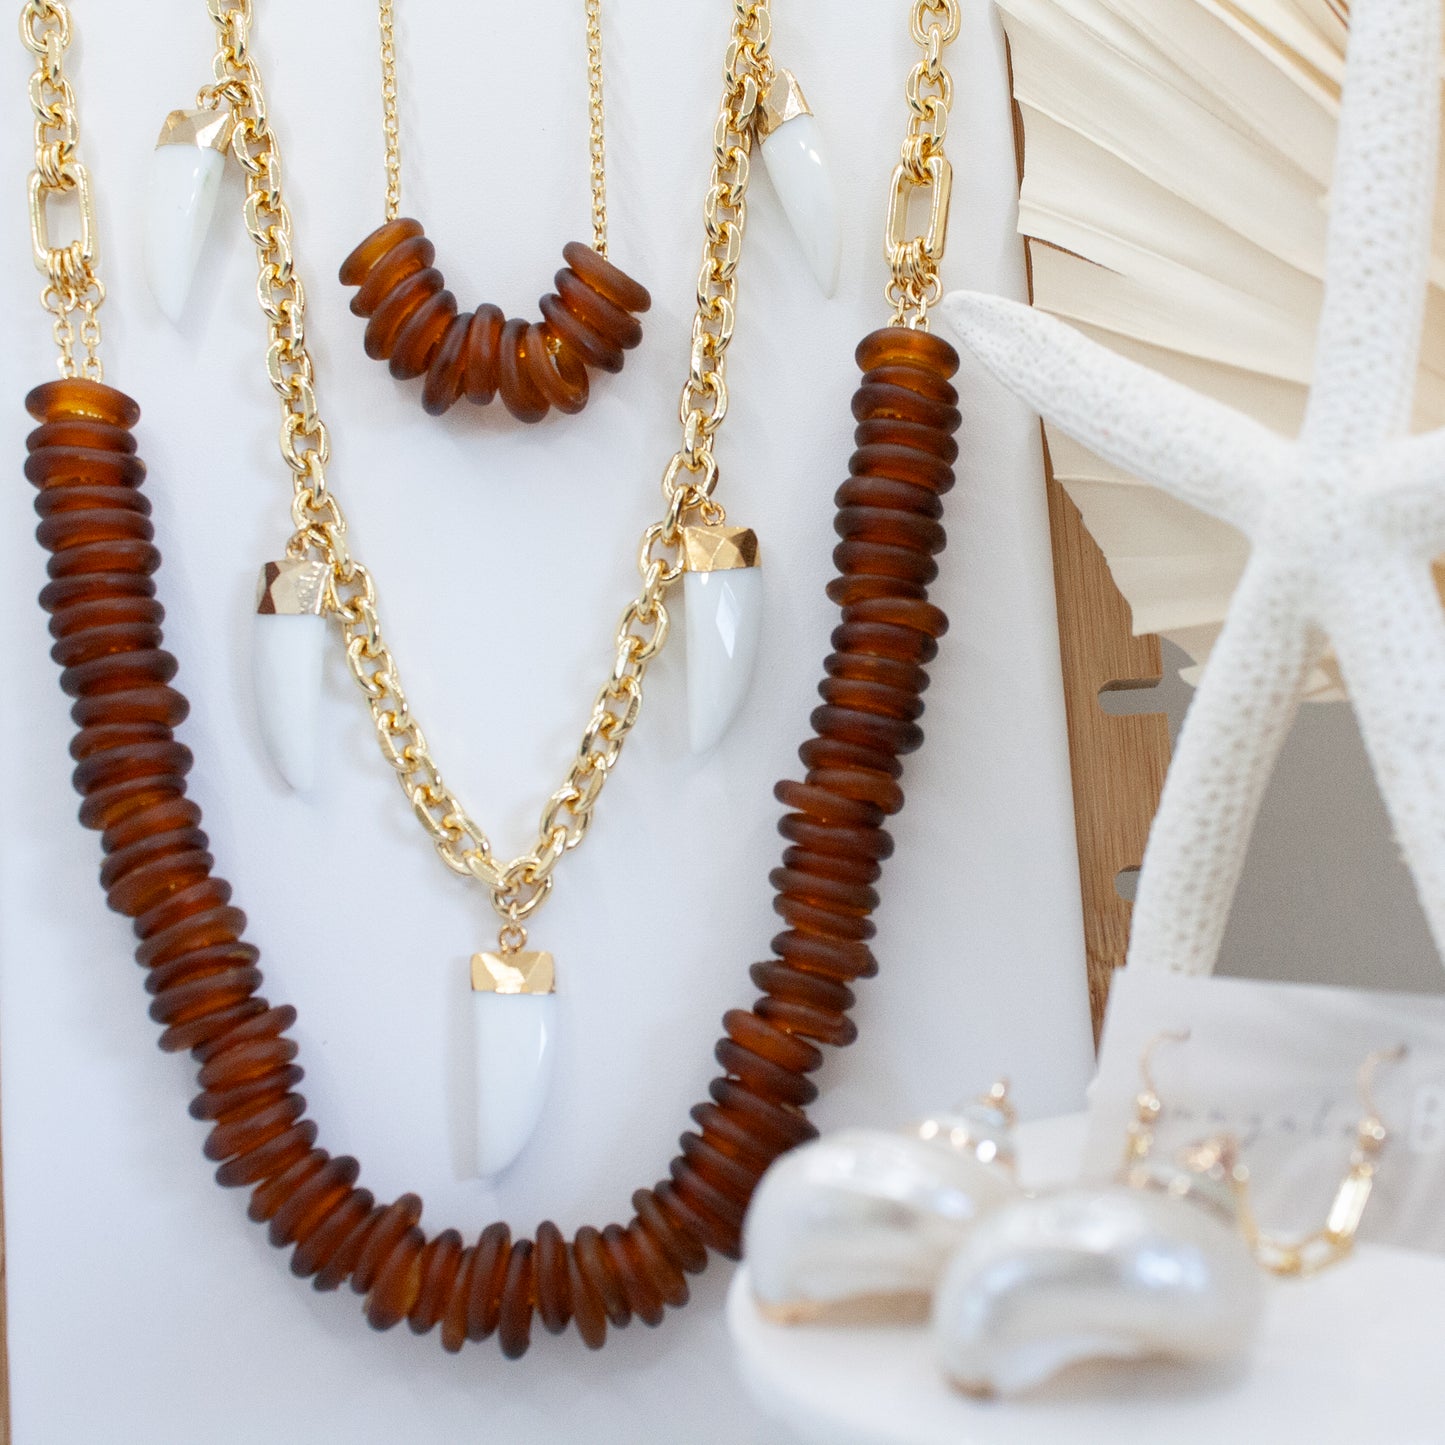 Koko Glass Bead Necklace - Amber :: 24k Gold Filled